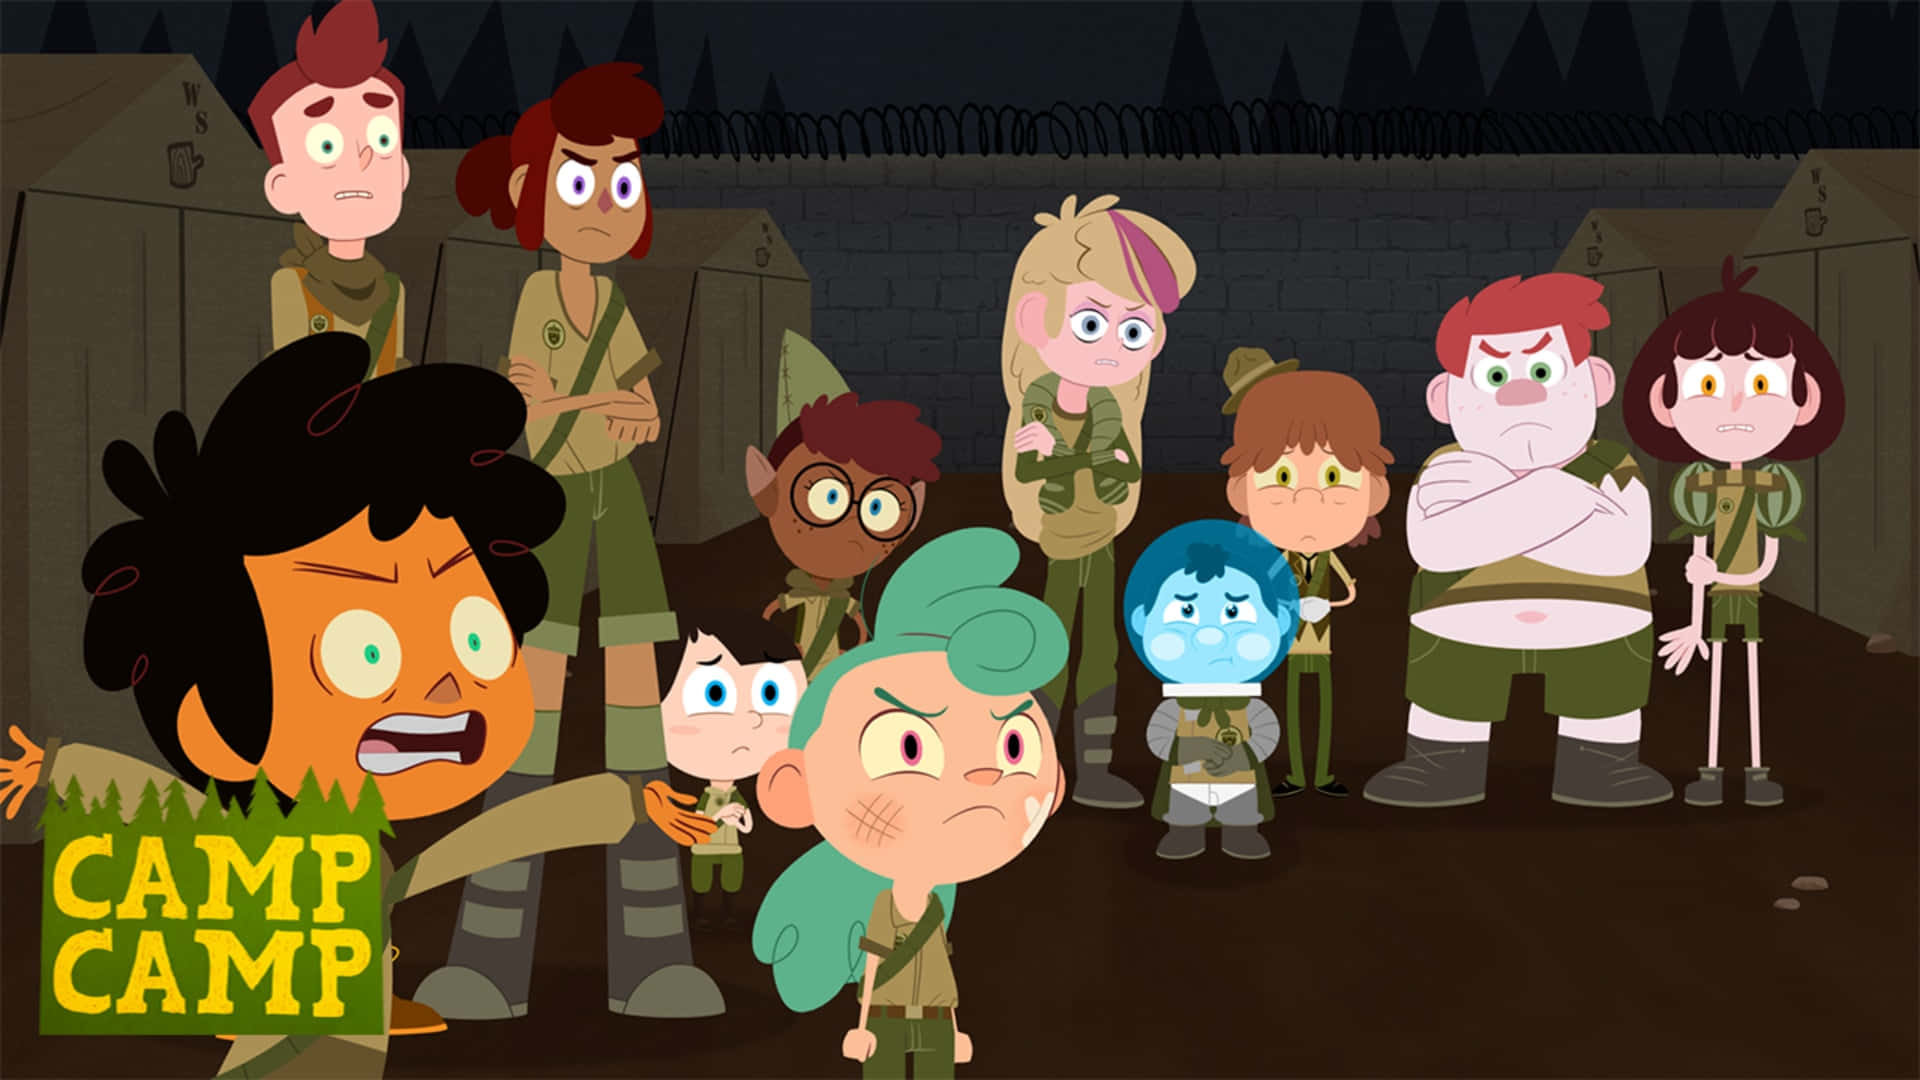 Angry Camp Camp Kids Background